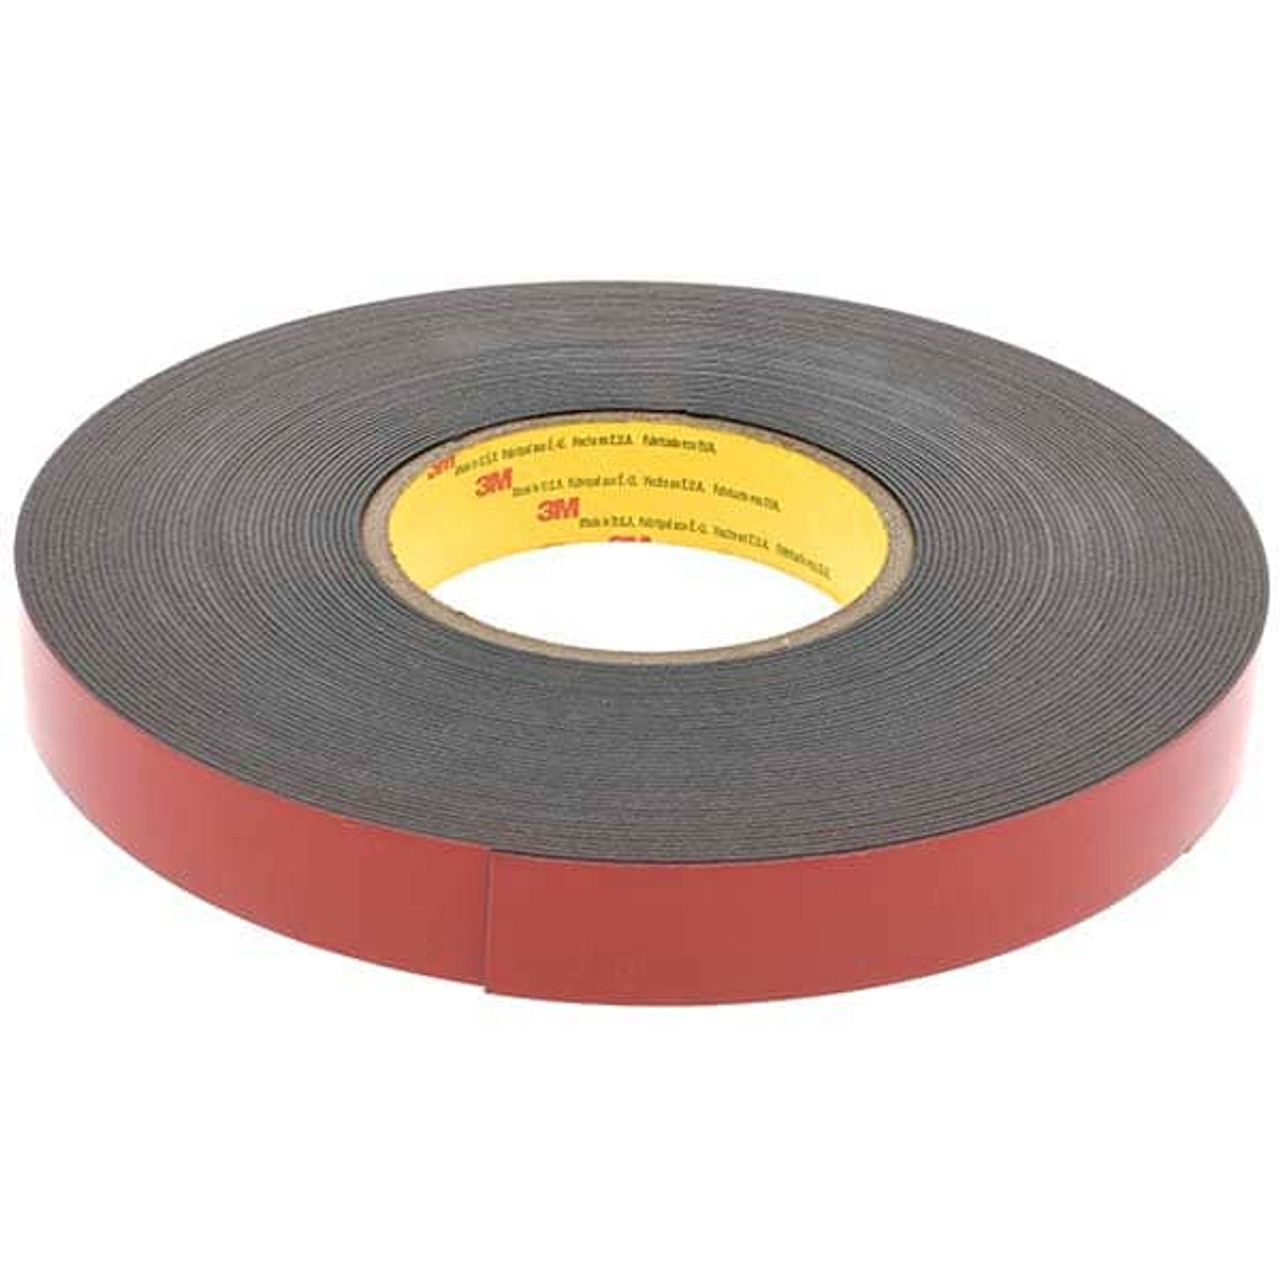 3M 7/8 x 20 Yd Acrylic Adhesive Double Sided Tape 47 mil Thick, Black,  Acrylic Foam Liner, Continuous Roll BD-KP81127 - 53604161